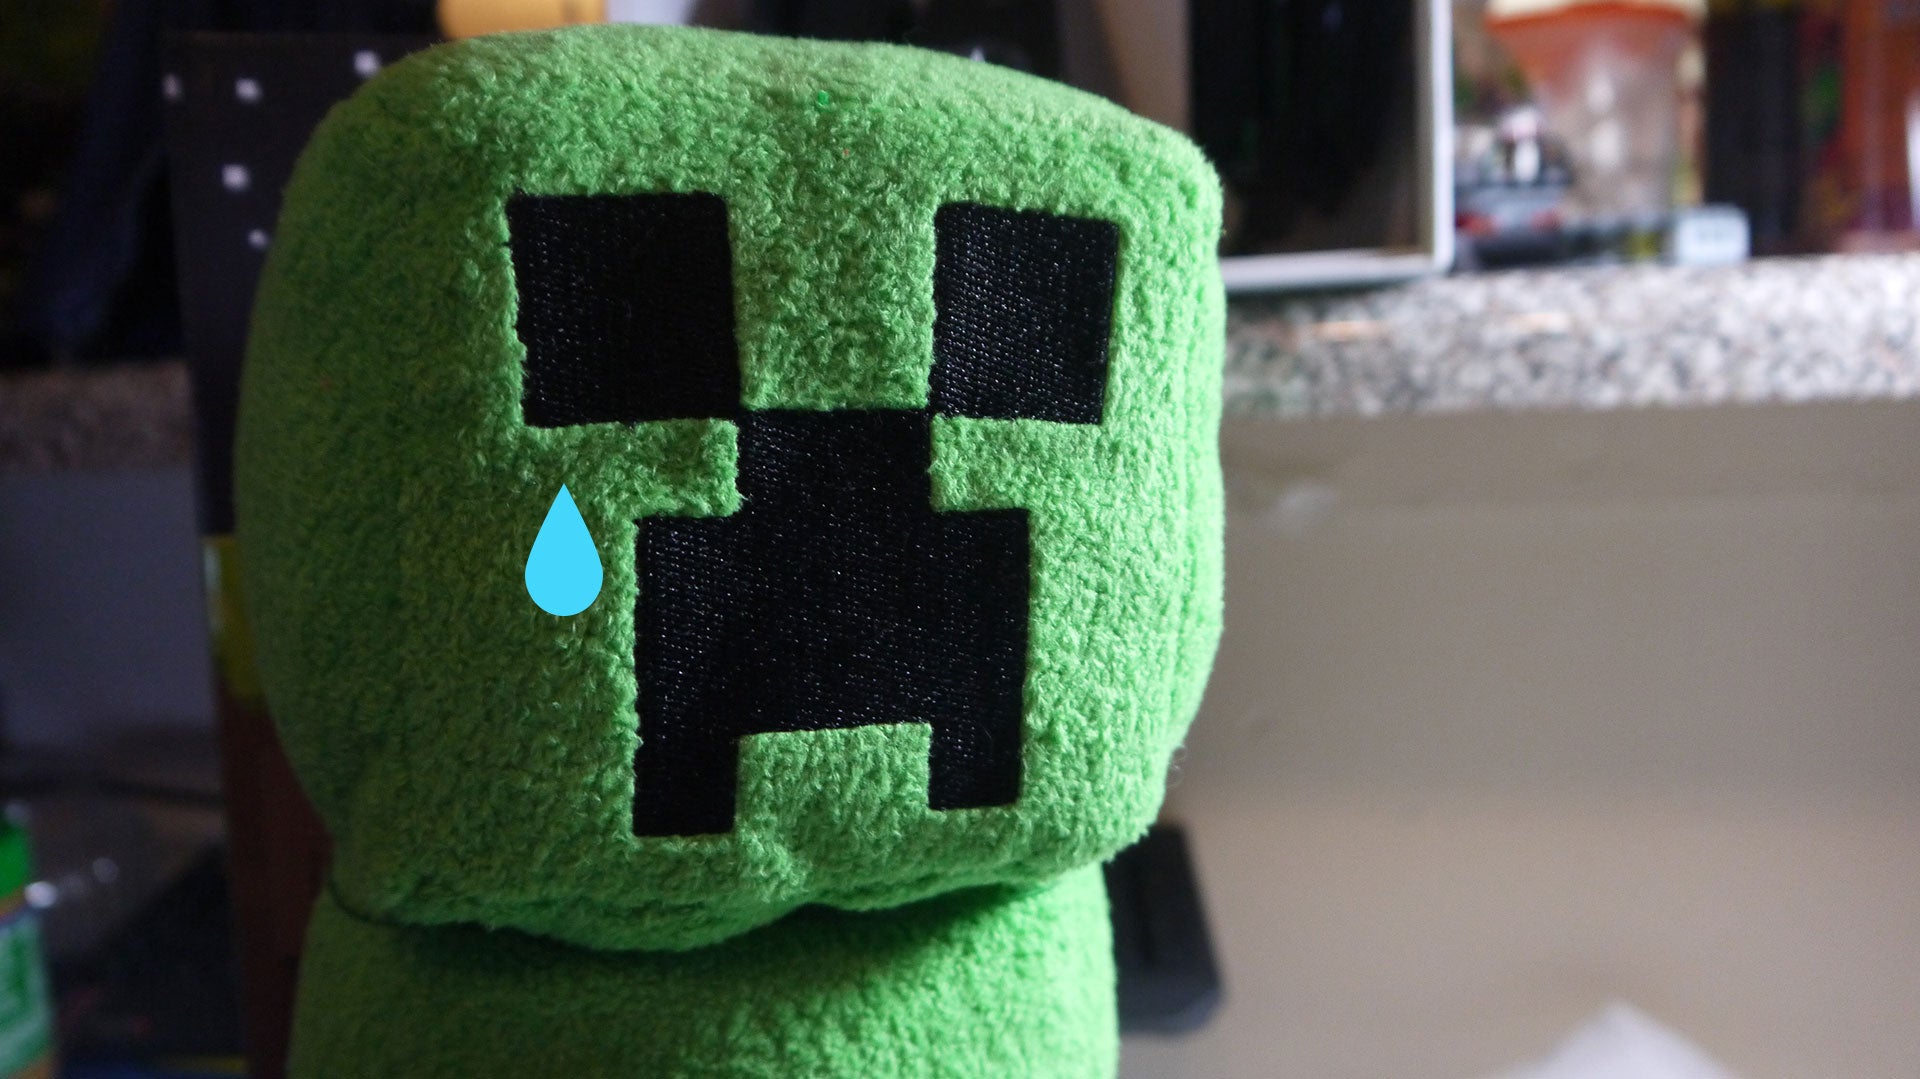 Okay, Maybe the Minecraft Creeper Plush Does Look a Little NSFW